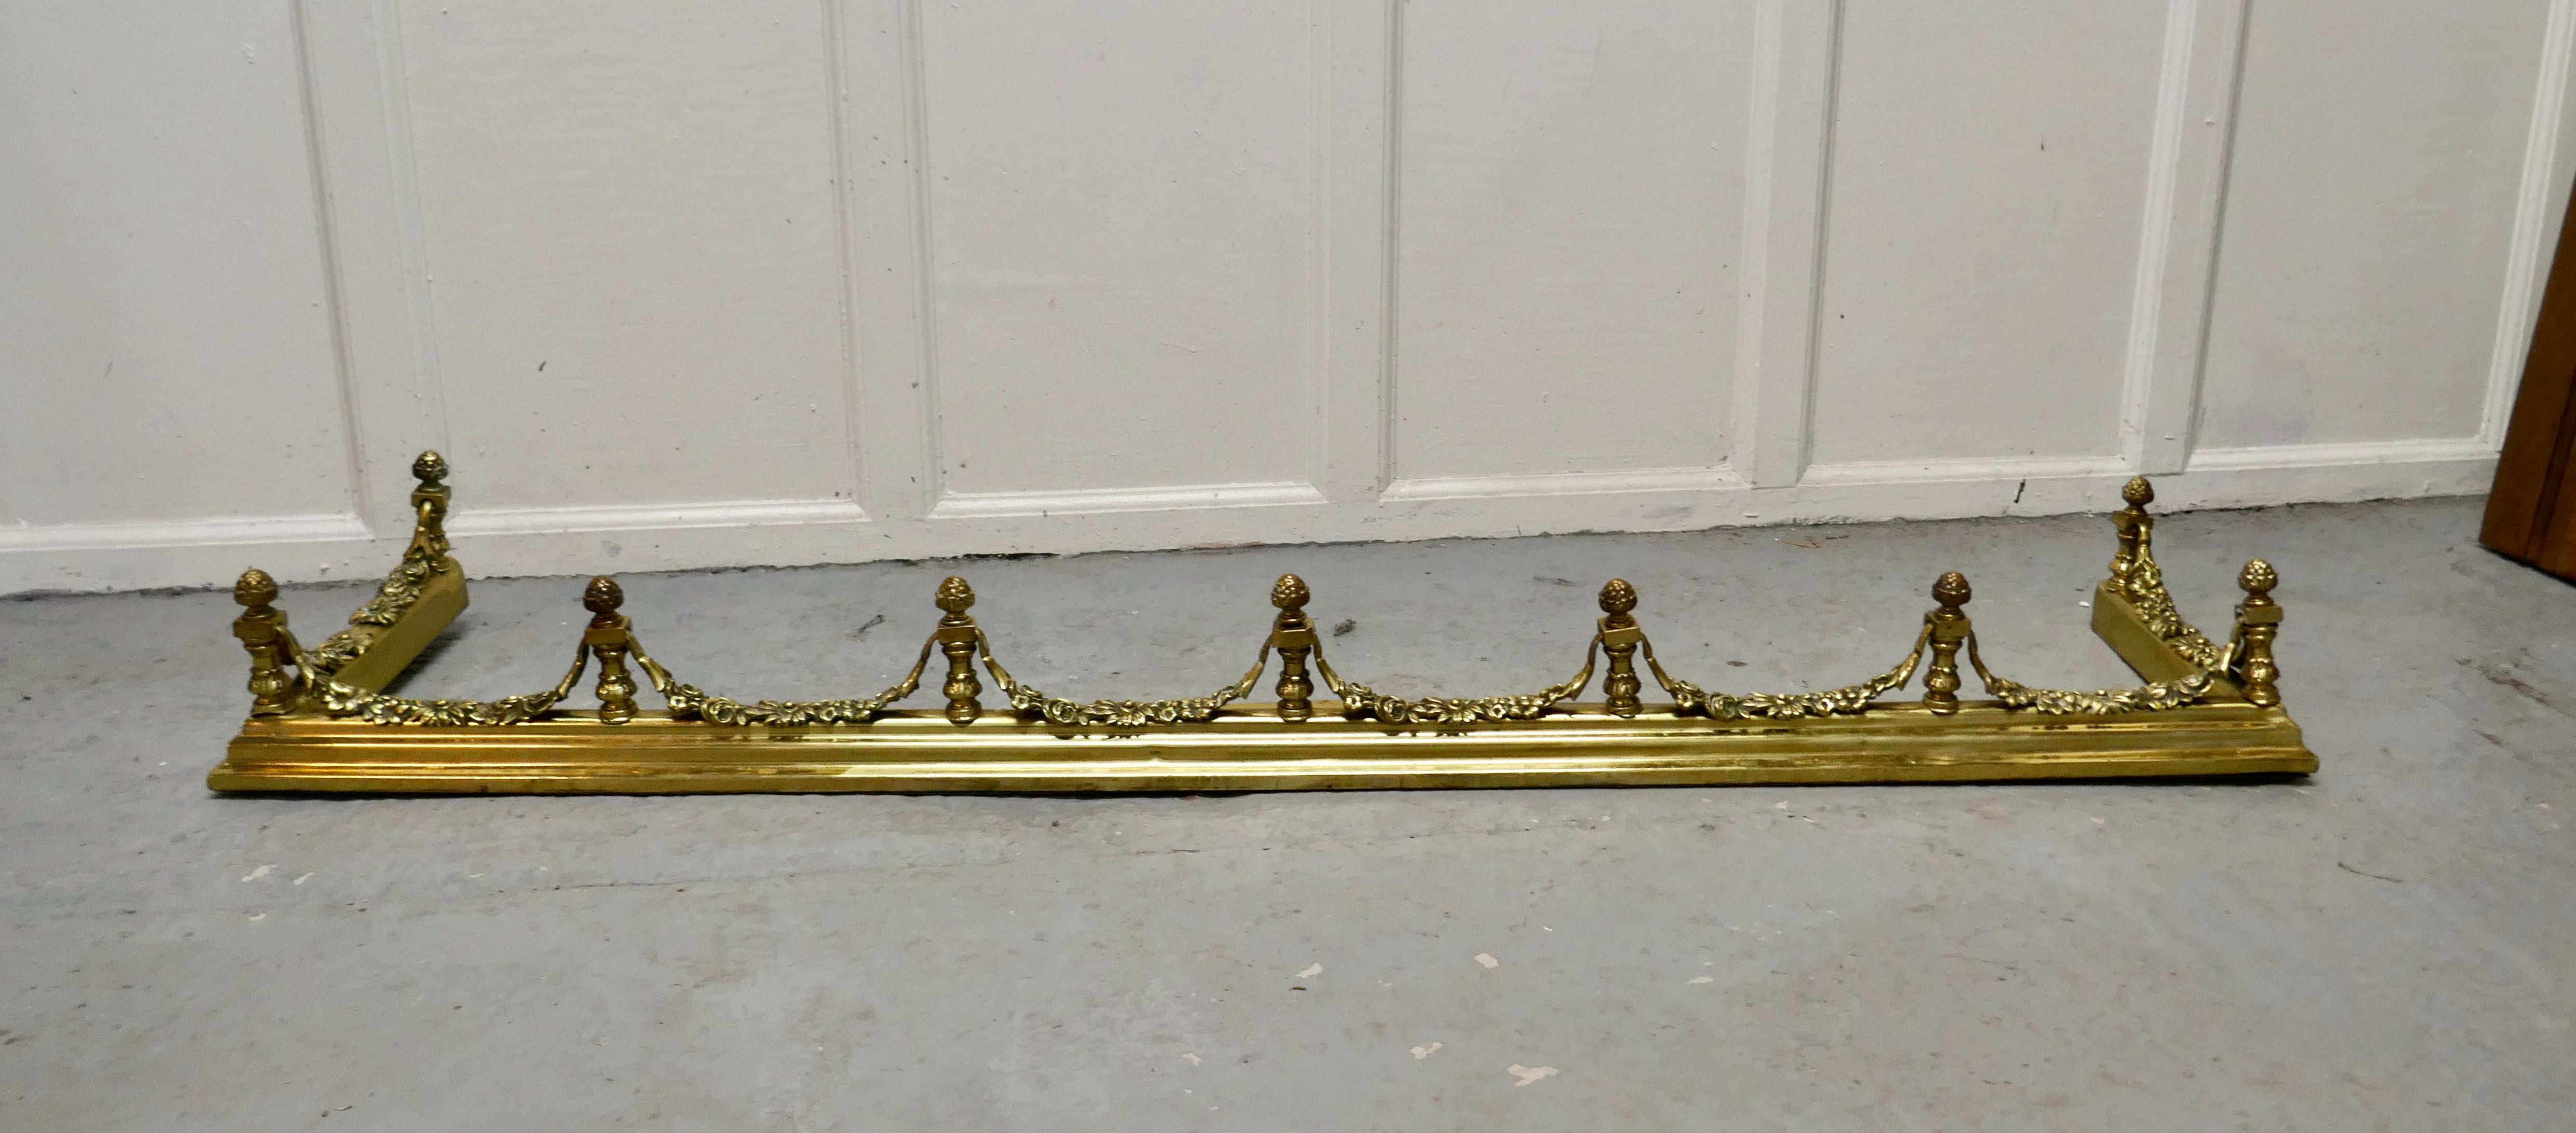 19th Century Heavy Brass Fender with Brass Garlands

This is a superb quality Brass Fender it has a broad base and elaborate spindles, with garlands of leafy swags this is one of the heaviest and finest quality fenders 
The Fender has delightfully